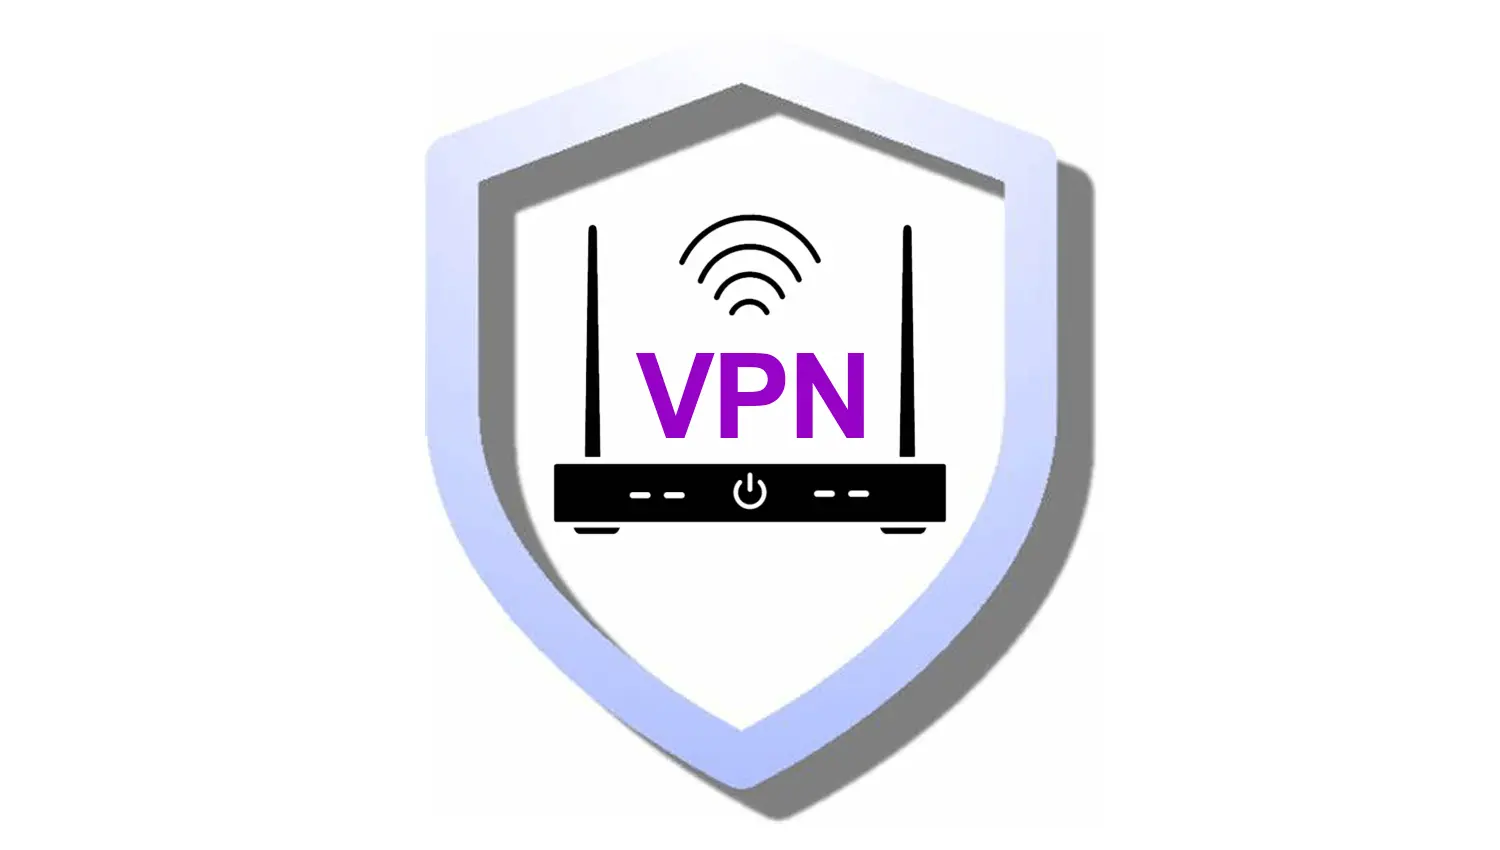 Why I should install a VPN on my router?